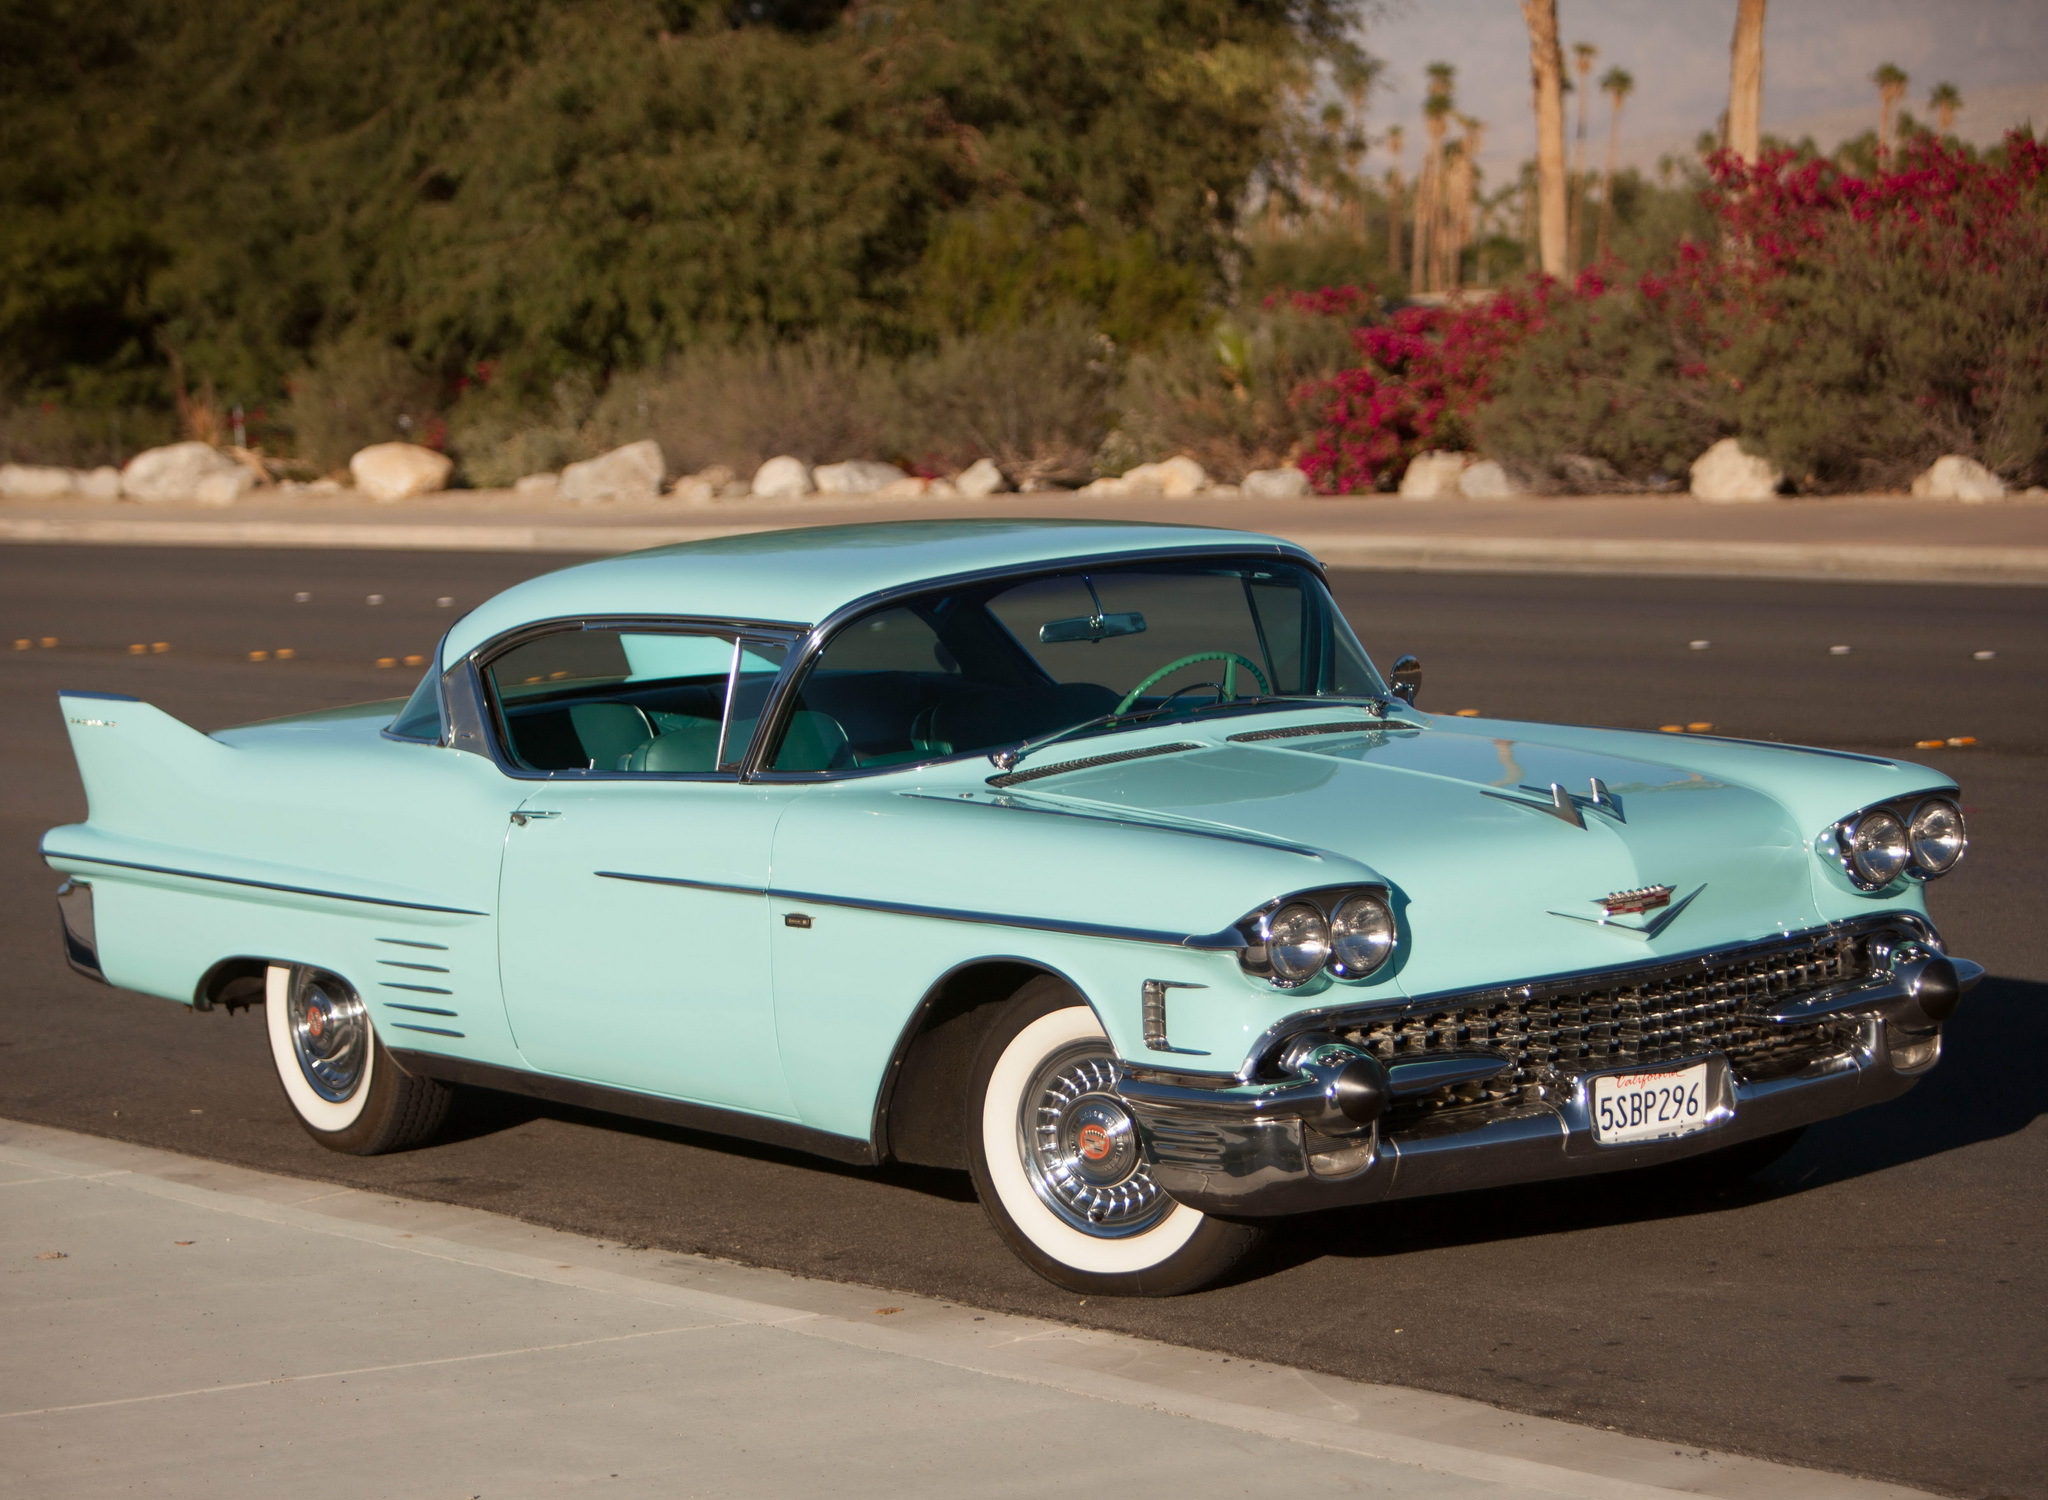 1958 Cadillac Sixty-Two Coupe de Ville